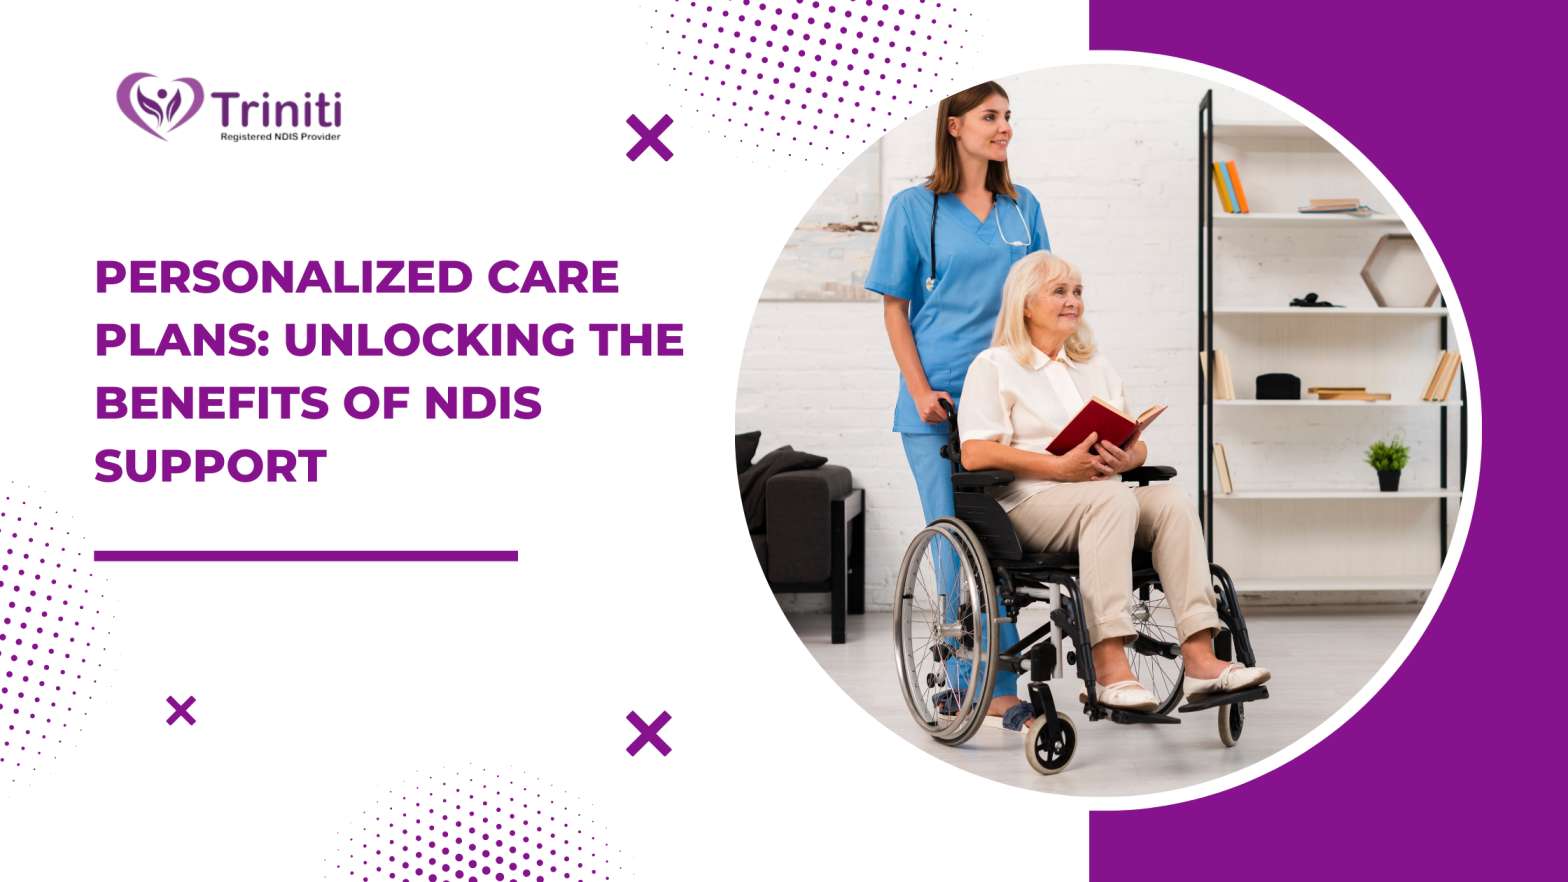 Personalized Care Plans: Unlocking the Benefits of NDIS Support 